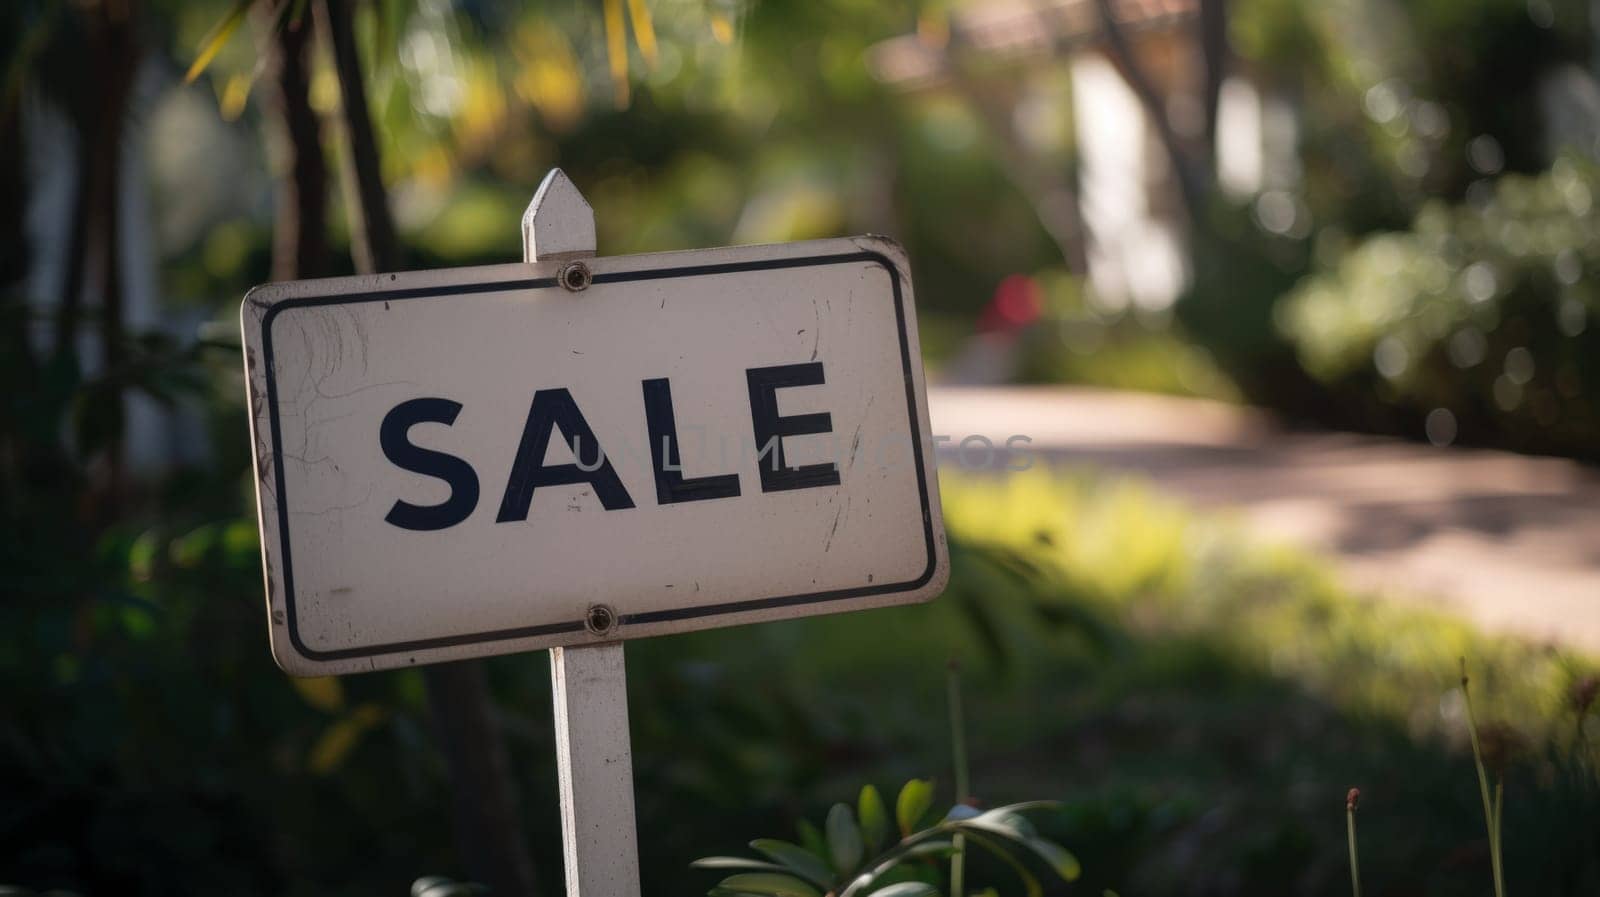 A sale sign in front of a house with trees and grass, AI by starush